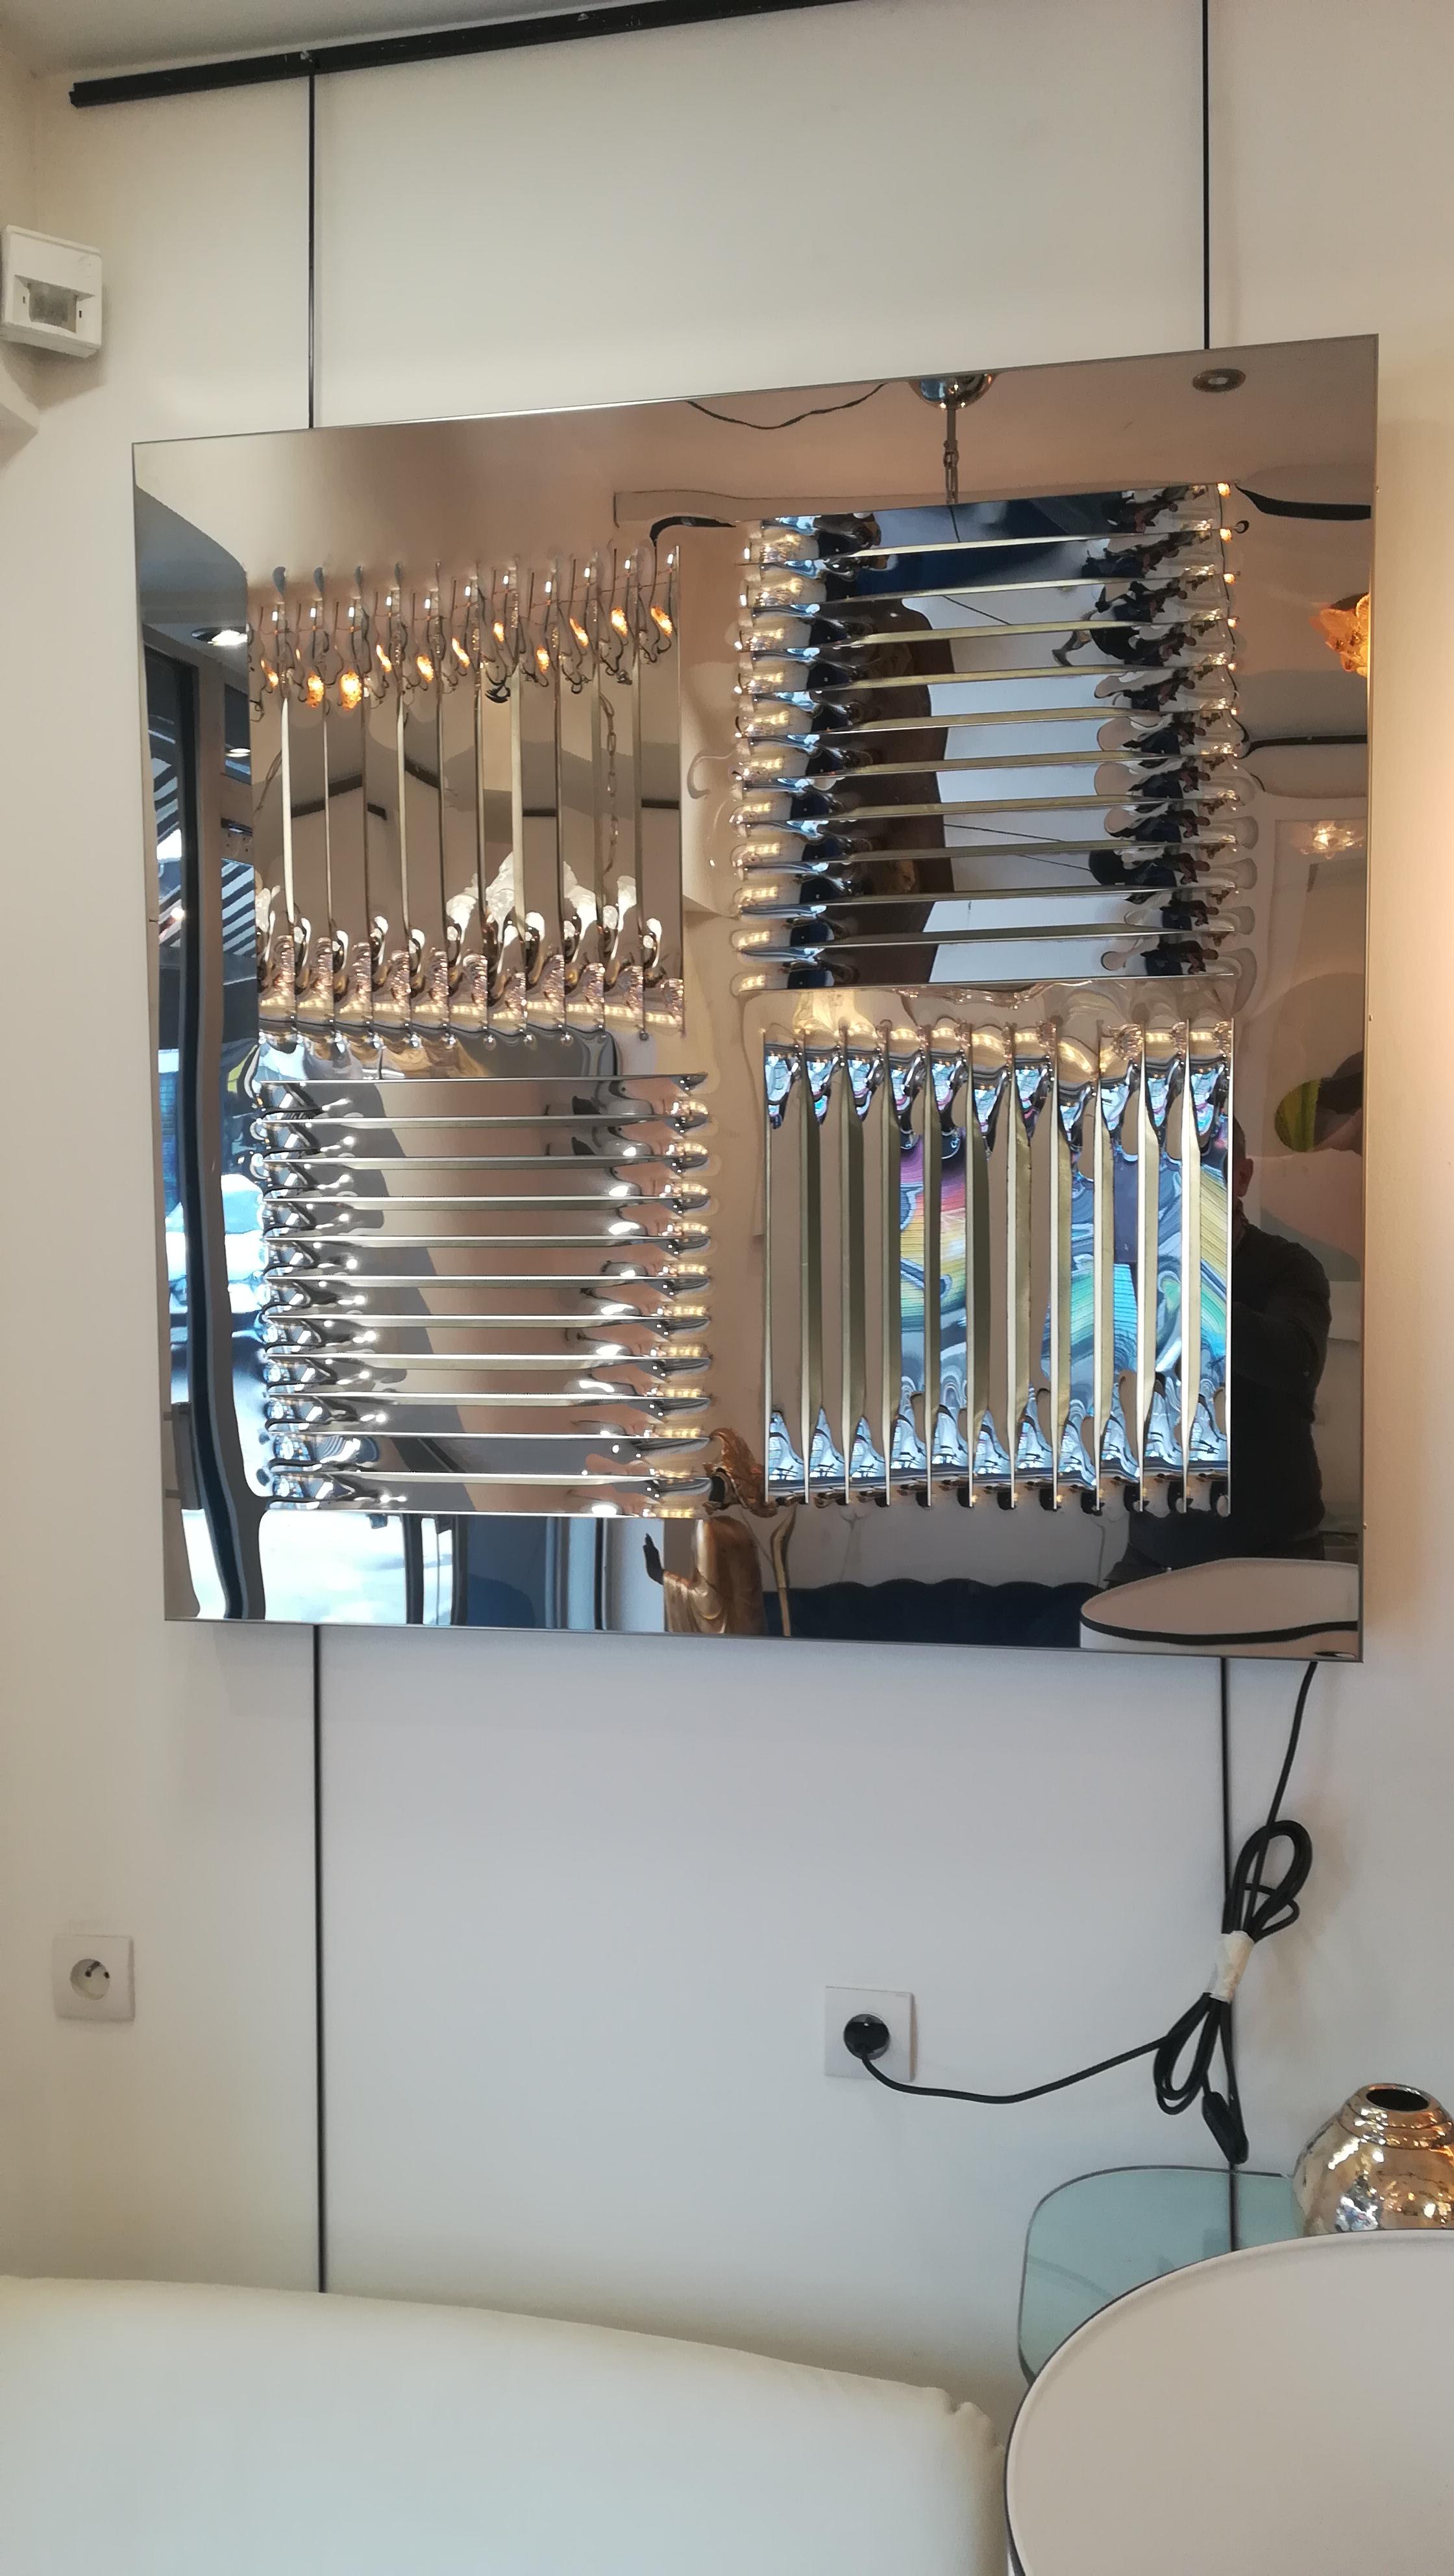 Stainless steel Kinetic sconce with 3 white neon’s lights
2 horizontal cuts and 2 vertical cuts.